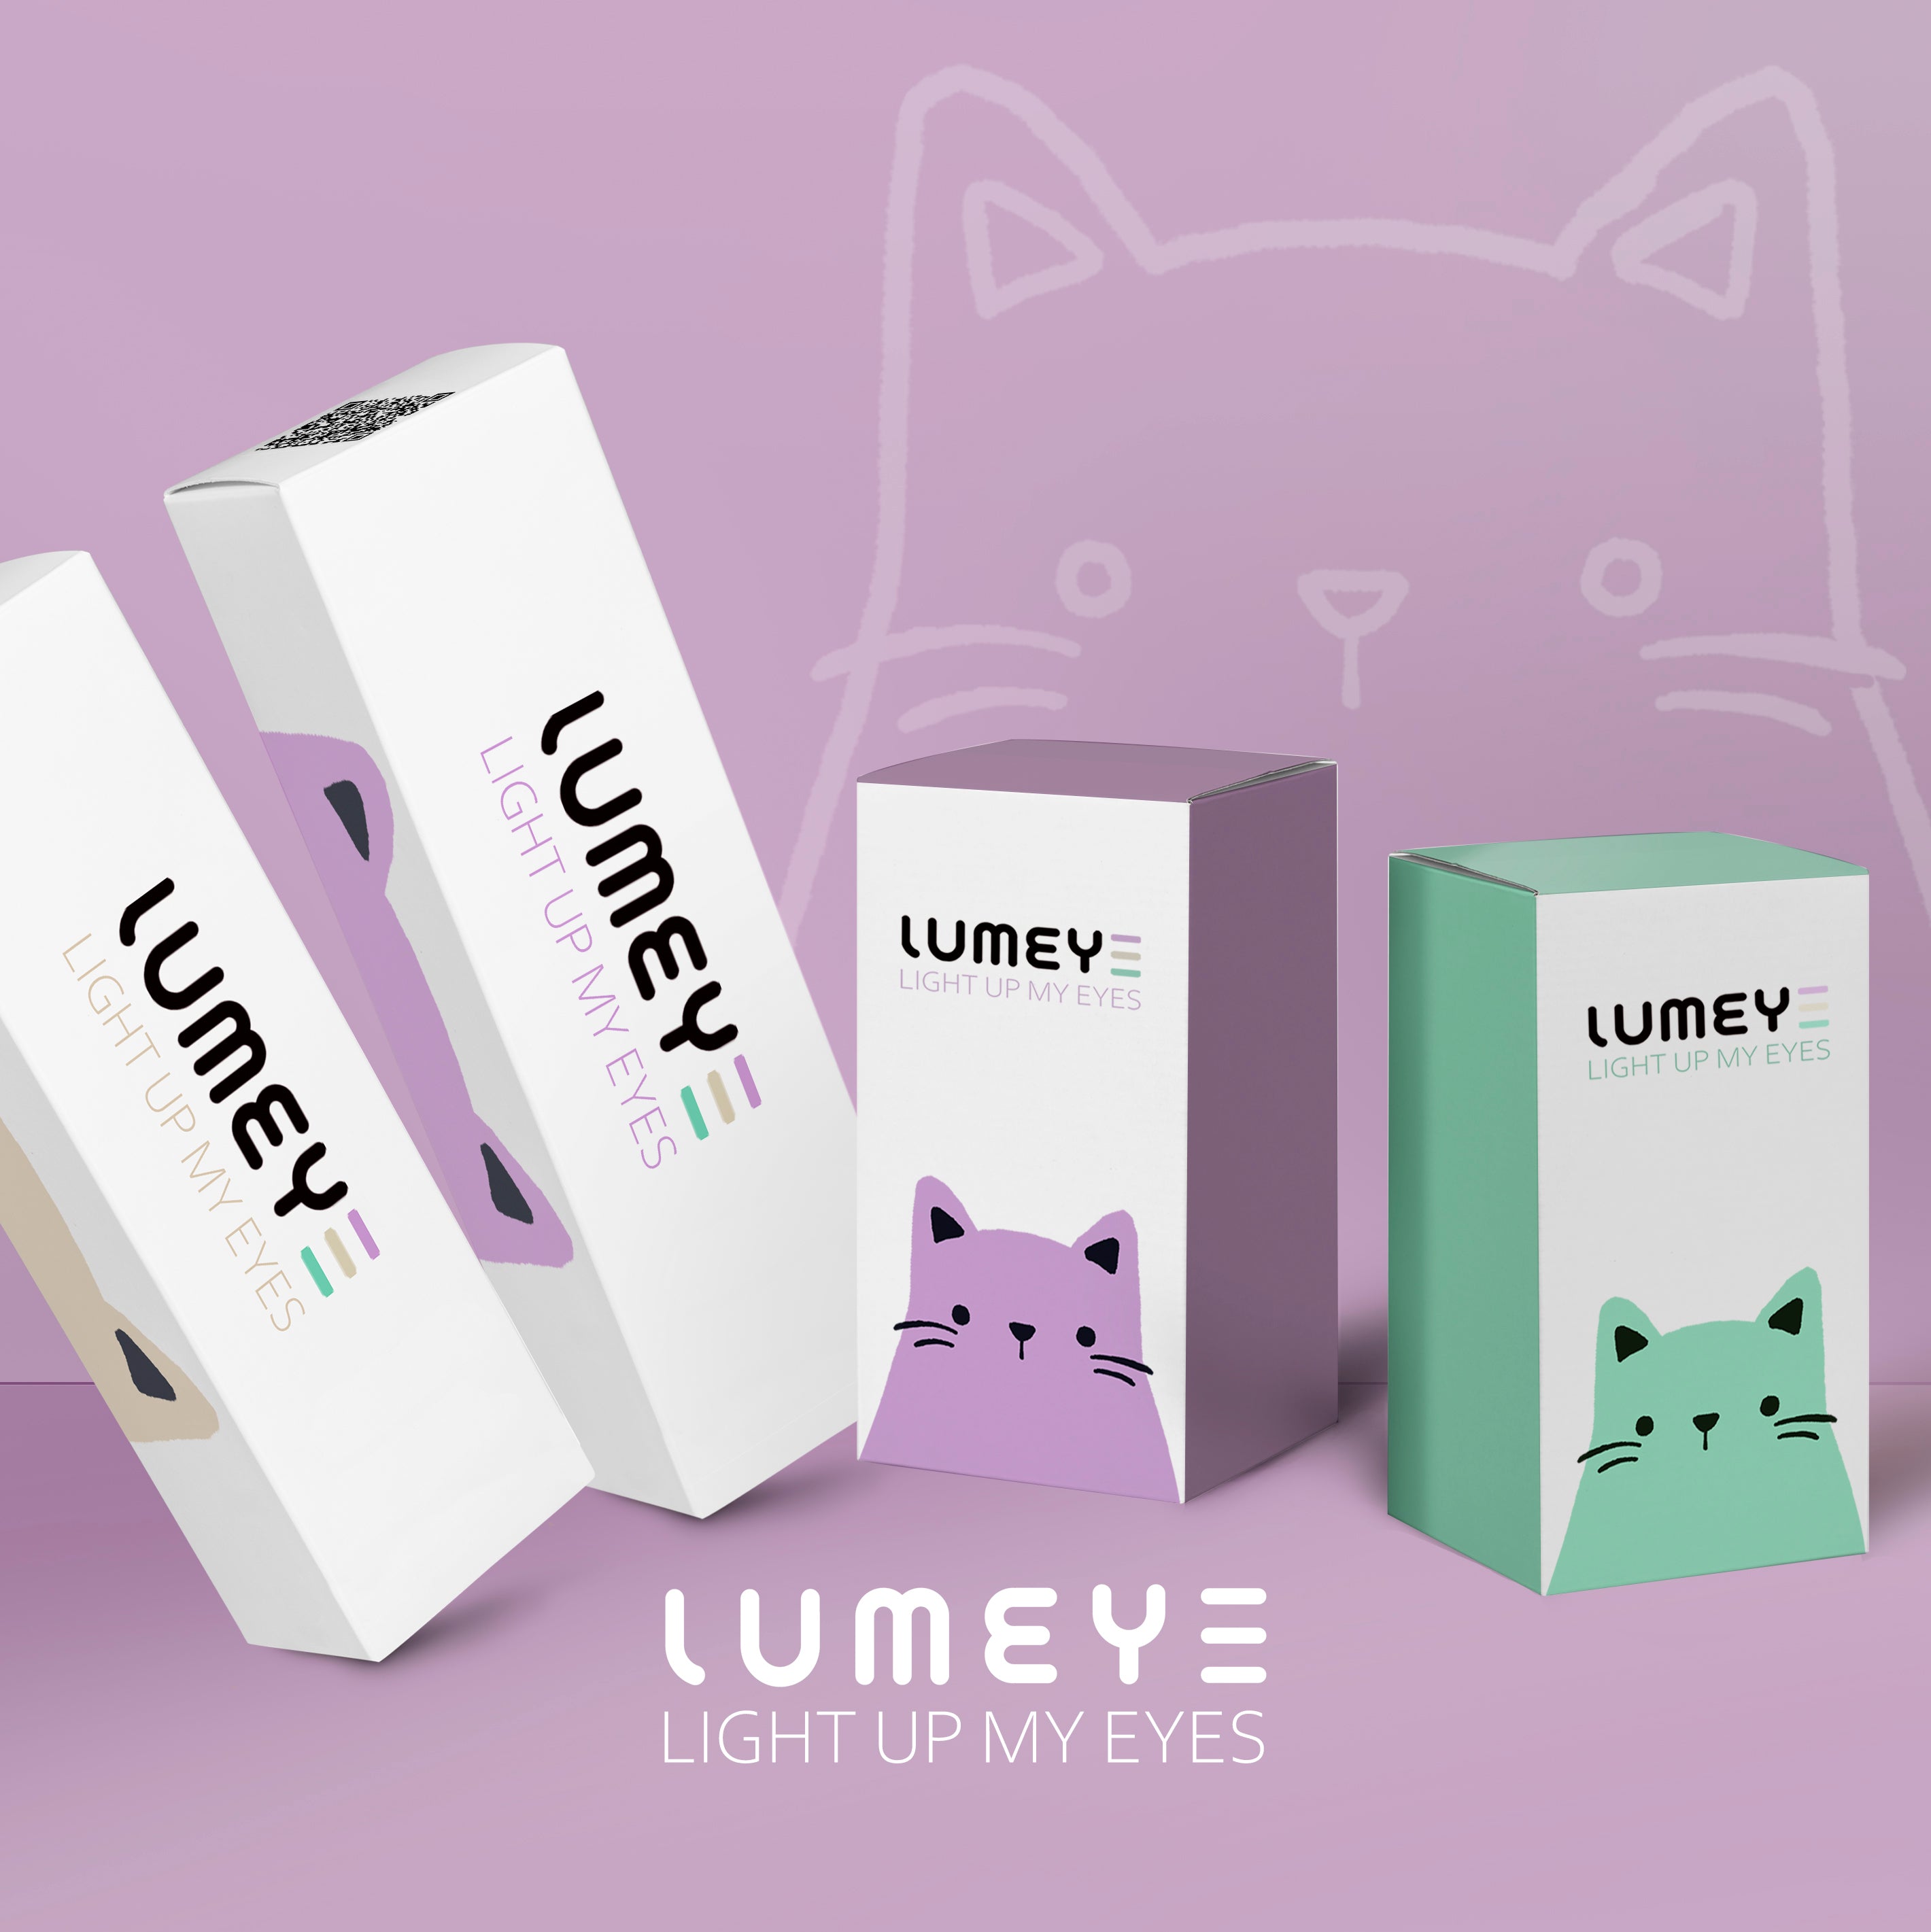 Best COLORED CONTACTS - LUMEYE Swirl Black Colored Contact Lenses - LUMEYE